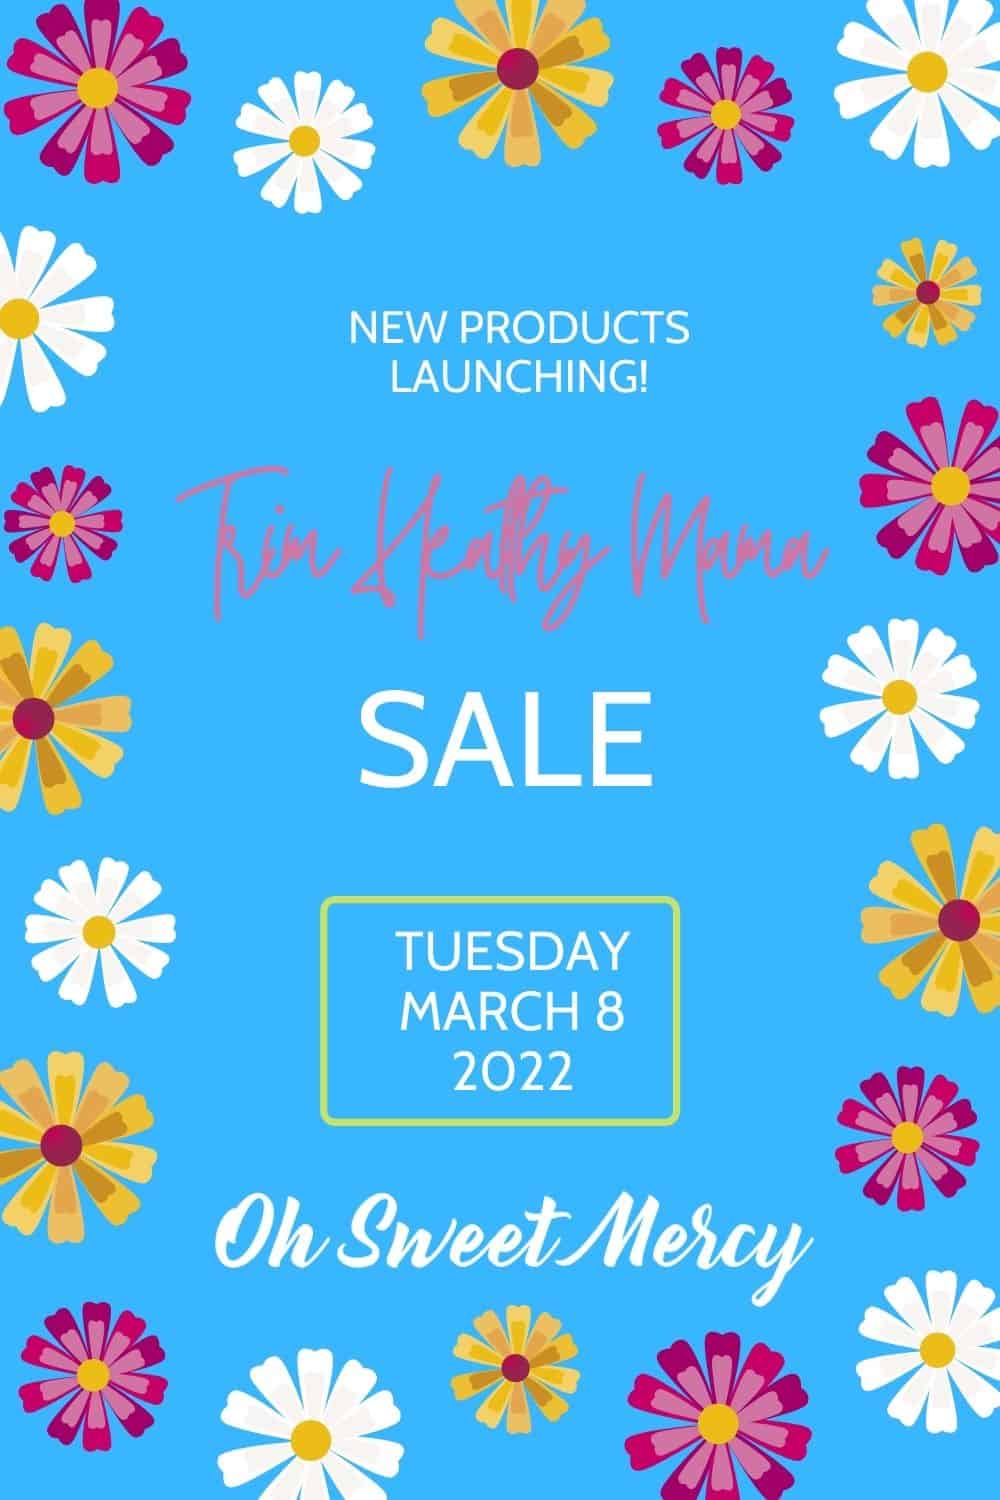 Graphic for THM Sale on 3-8-22